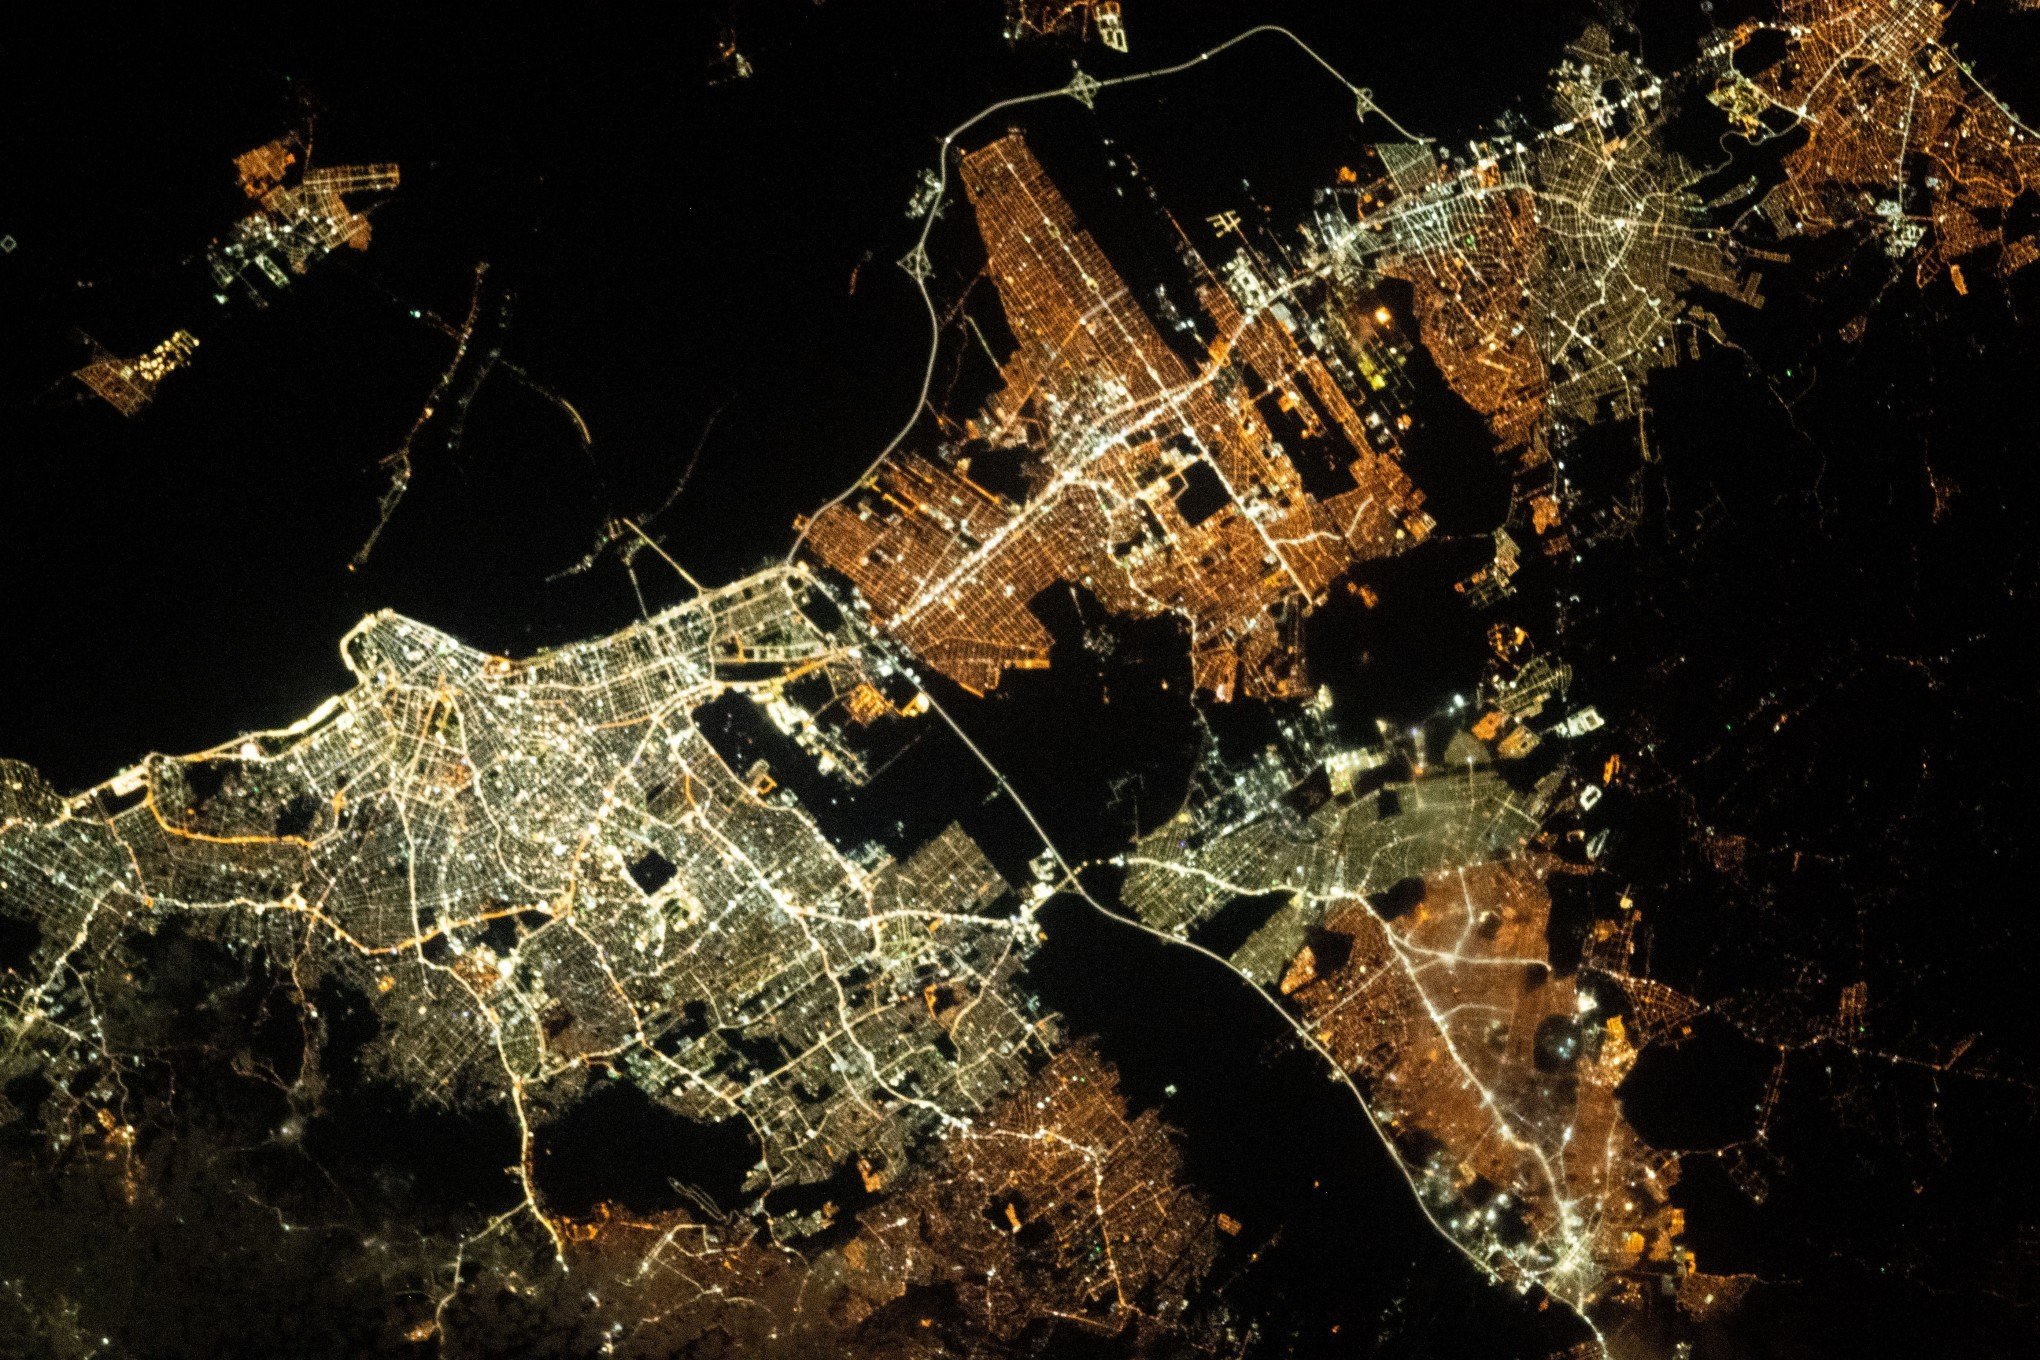 Cities in the metropolitan area are photographed by a NASA astronaut – Region